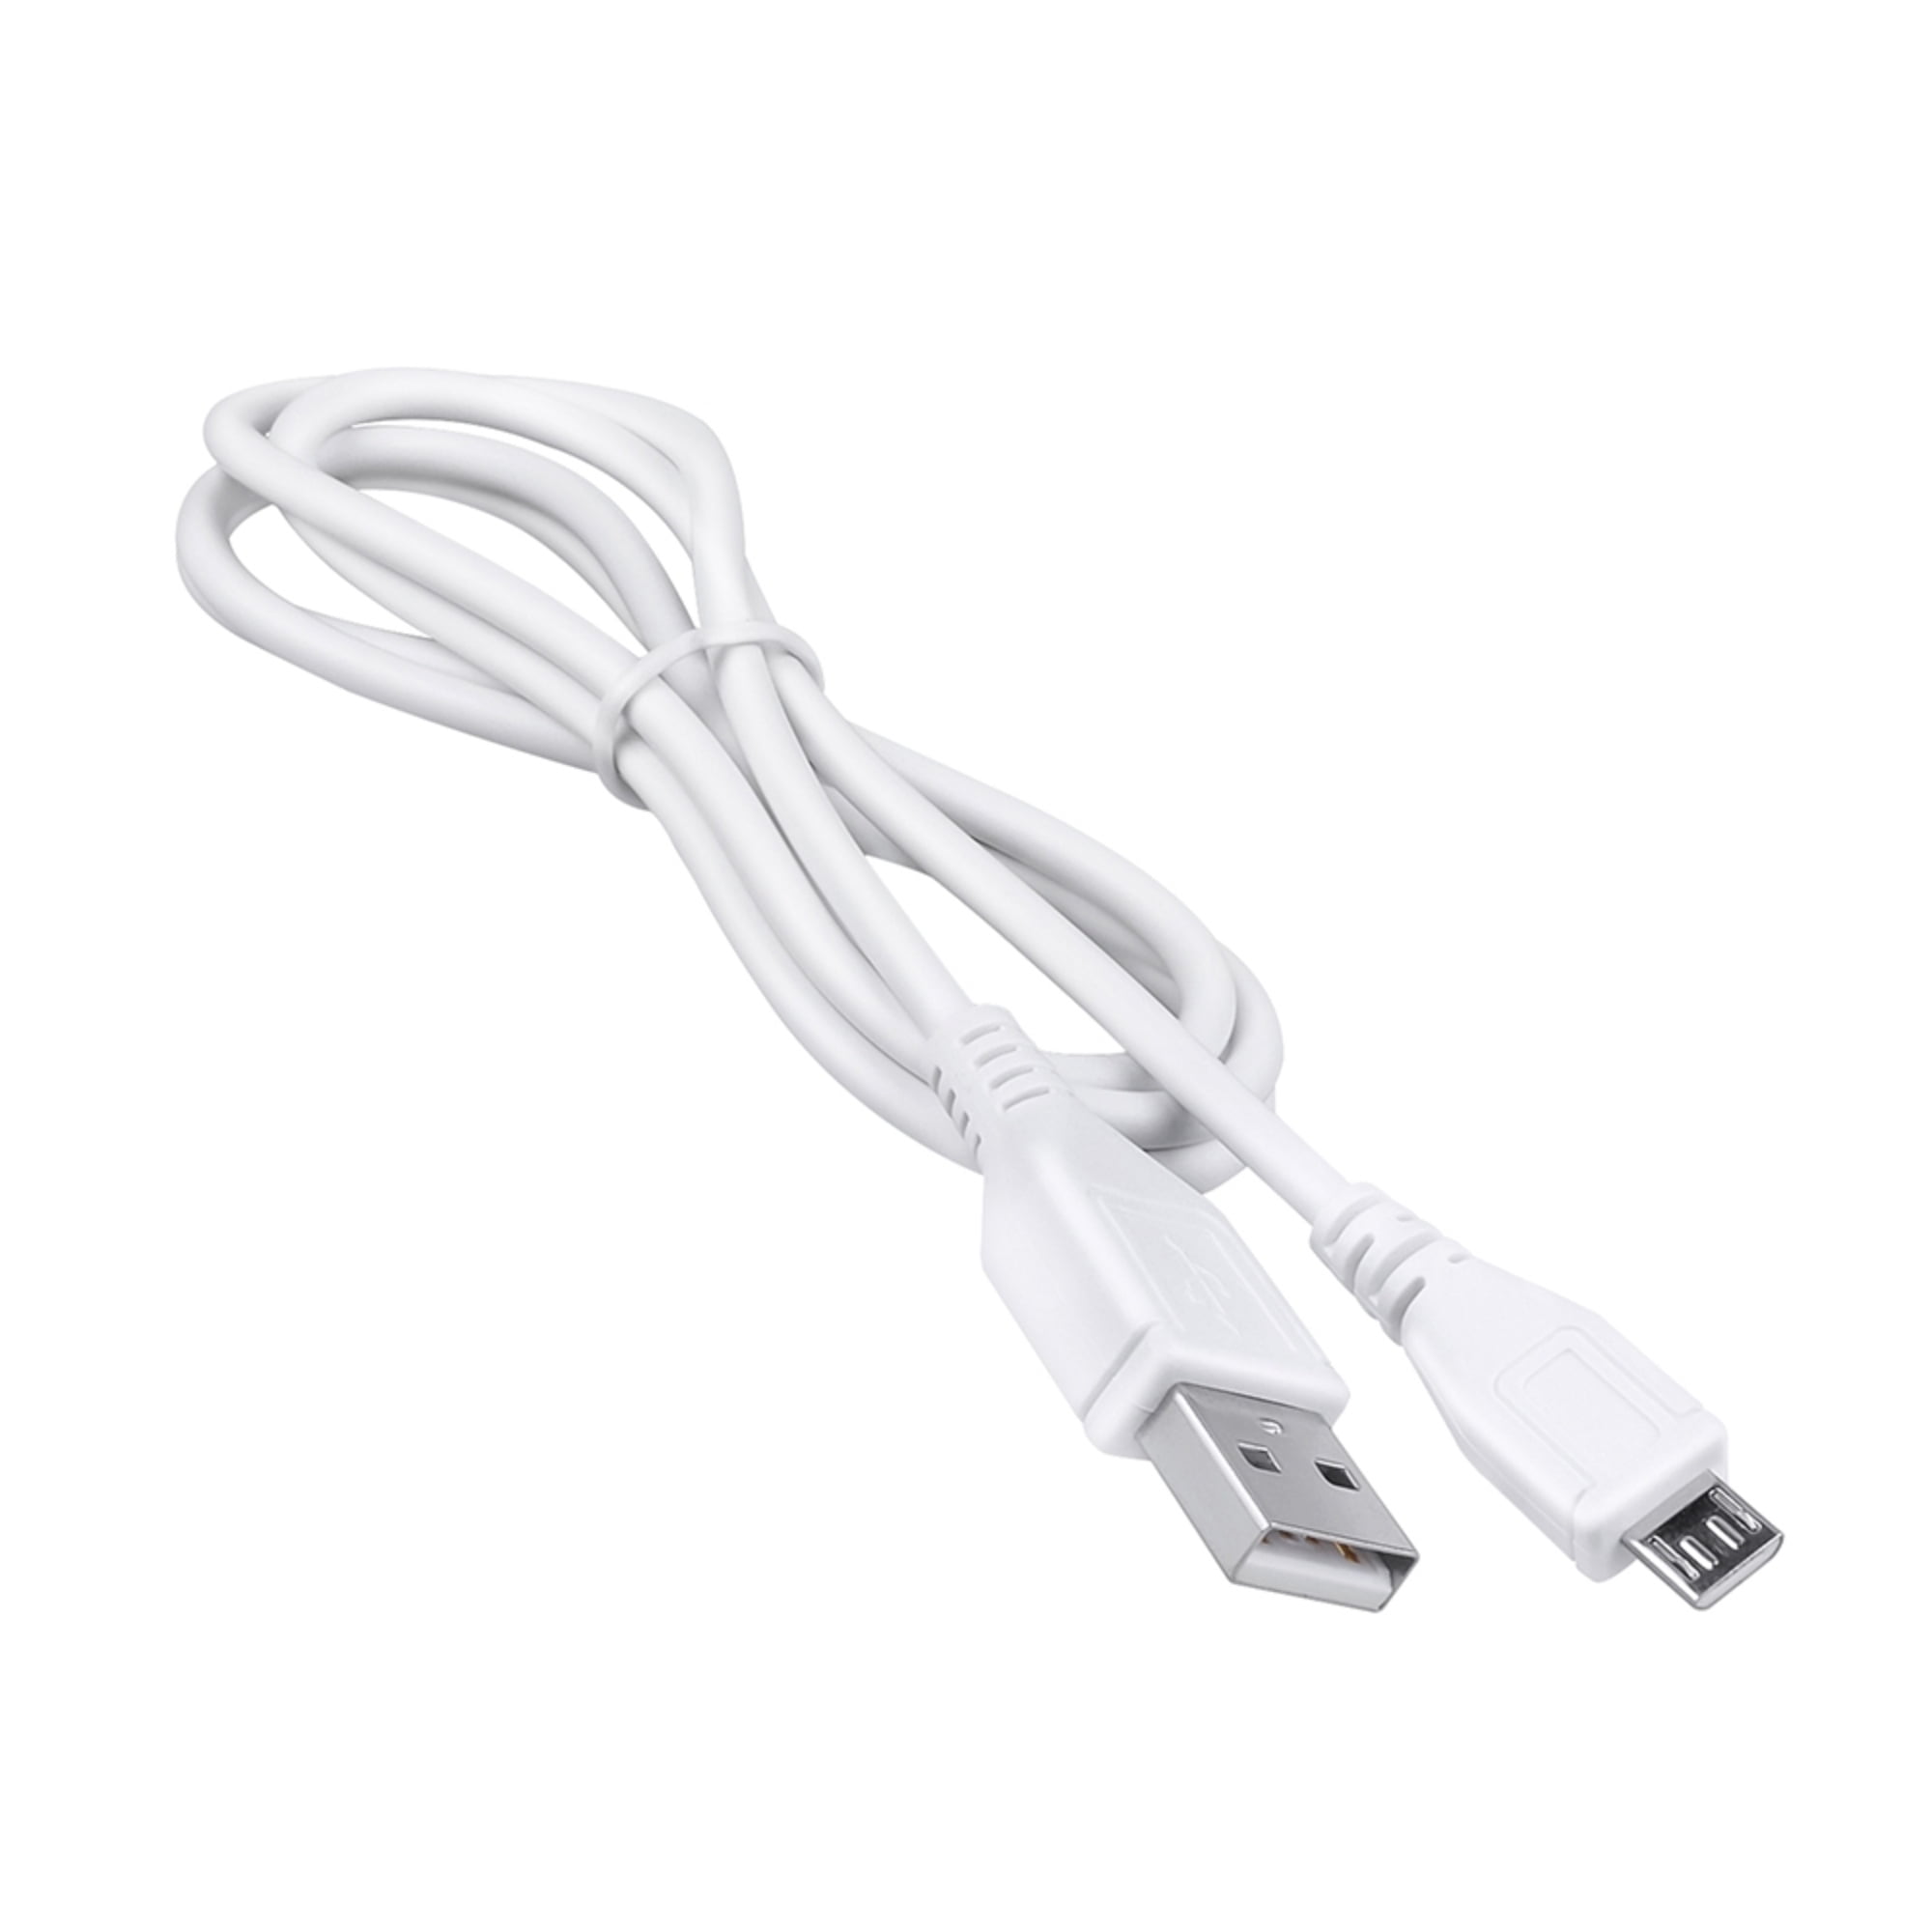 PKPOWER 5ft White Micro USB 2.0 Data Cord USB PC Cable Power Cord for Wacom Intuos4 Intuos5 Touch Small Medium Large Pen Tablet PC Fun CTE450 CTE650 PTH450 PTH650